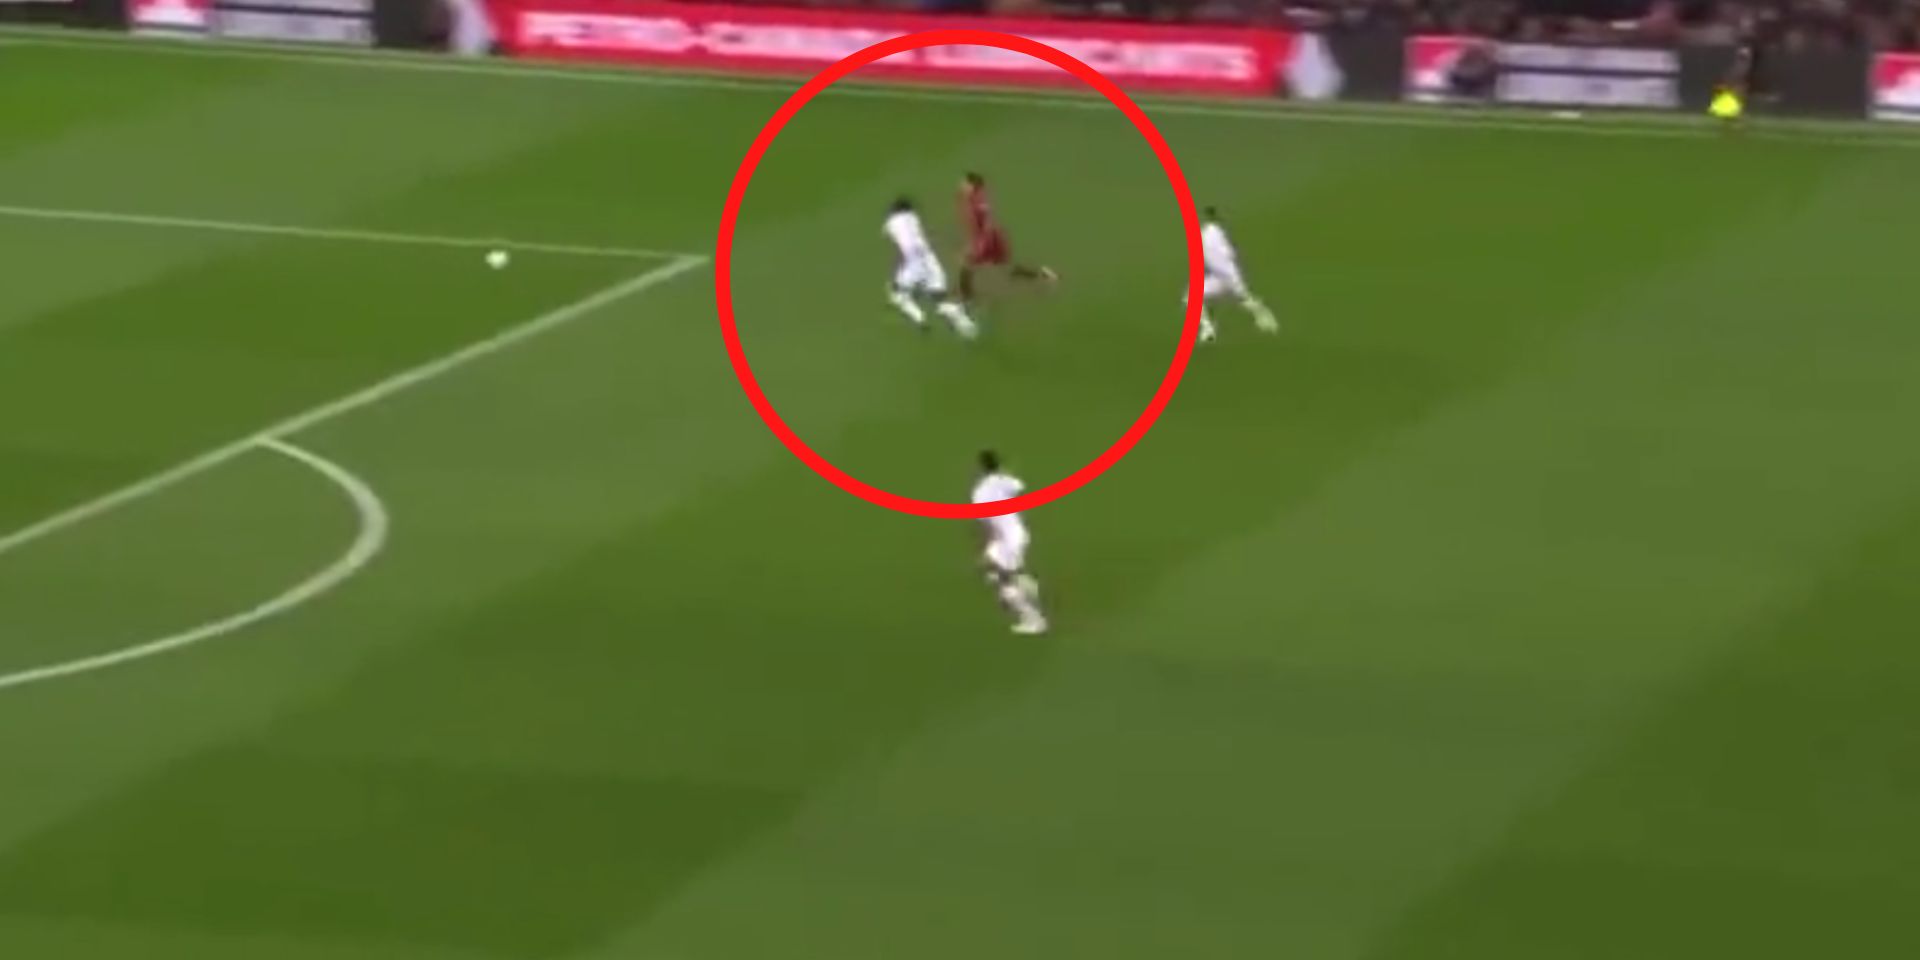 (Video) This is the fastest a Premier League player has ever moved, as Darwin Nunez sets speed record